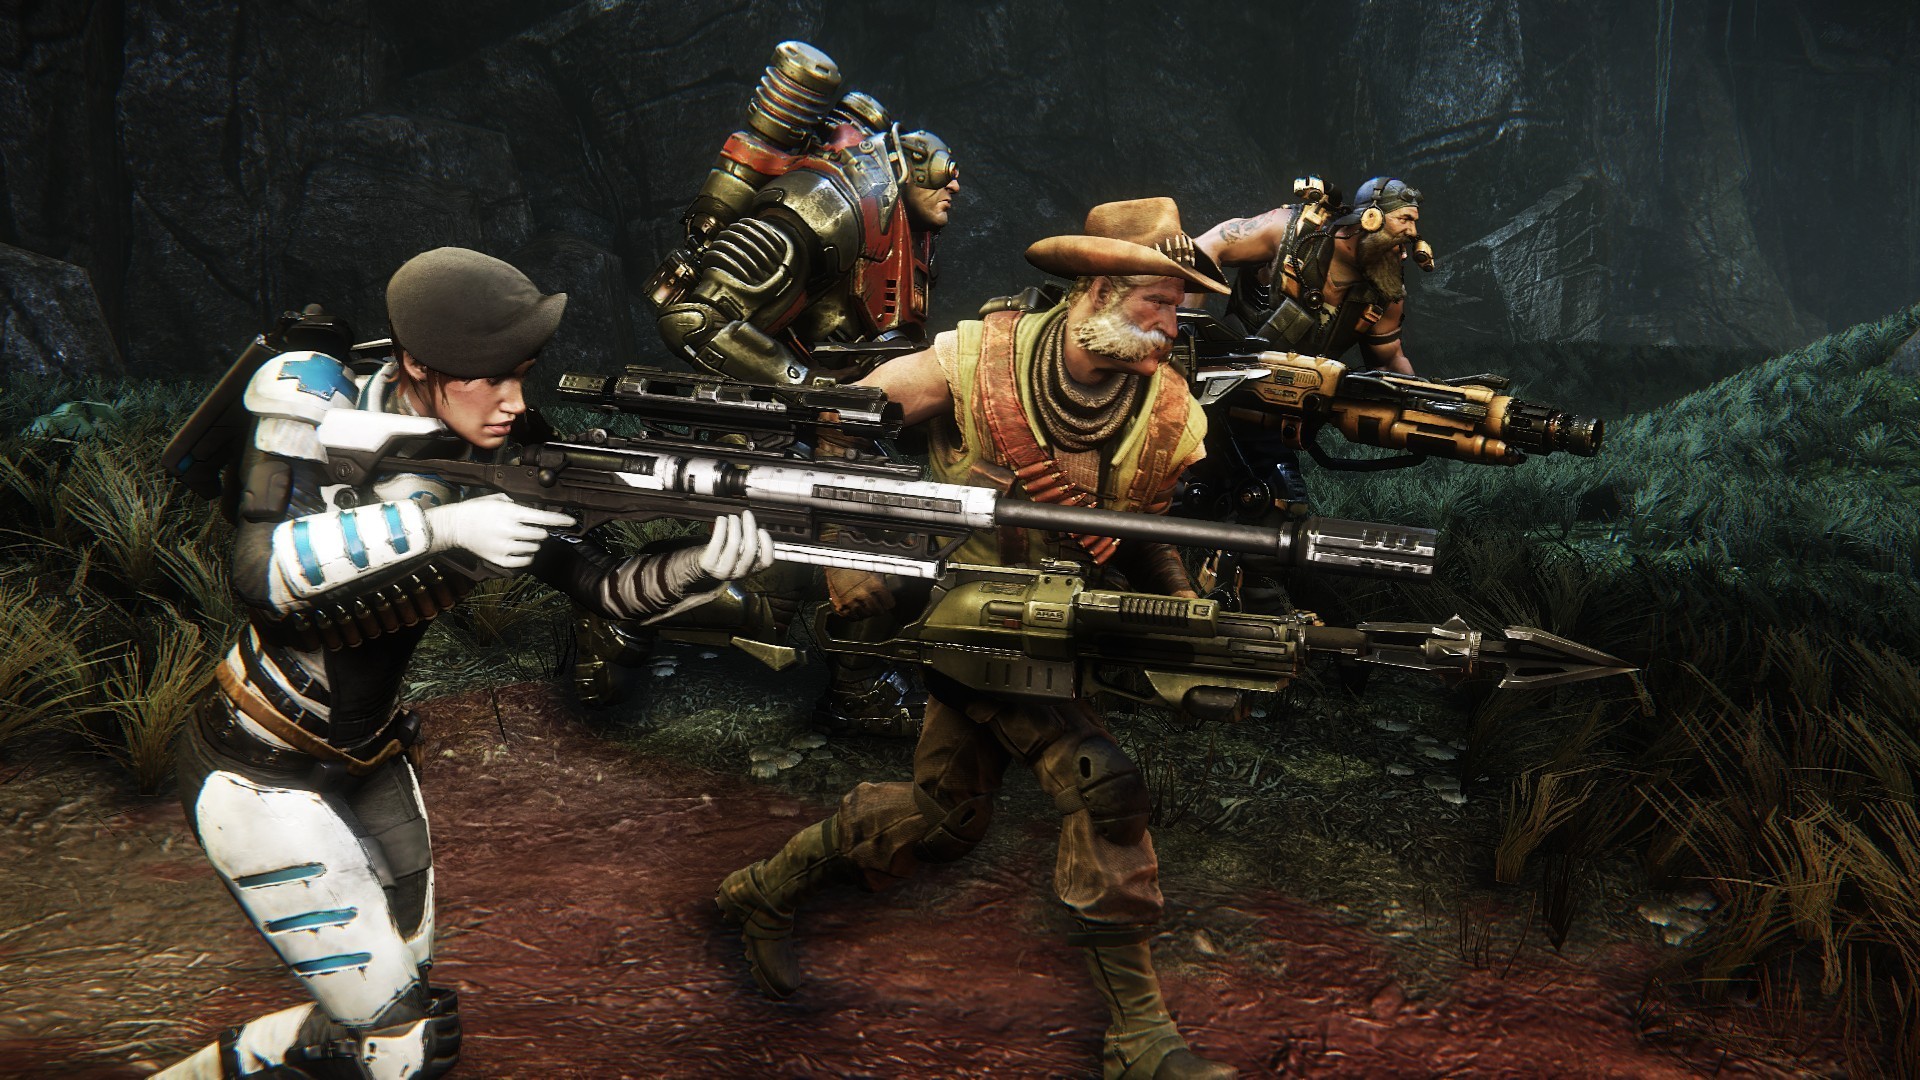 Evolve-Gets-Hour-Long-Video-Showcasing-Perks-and-a-Deadly-Match-467562-8.jpg